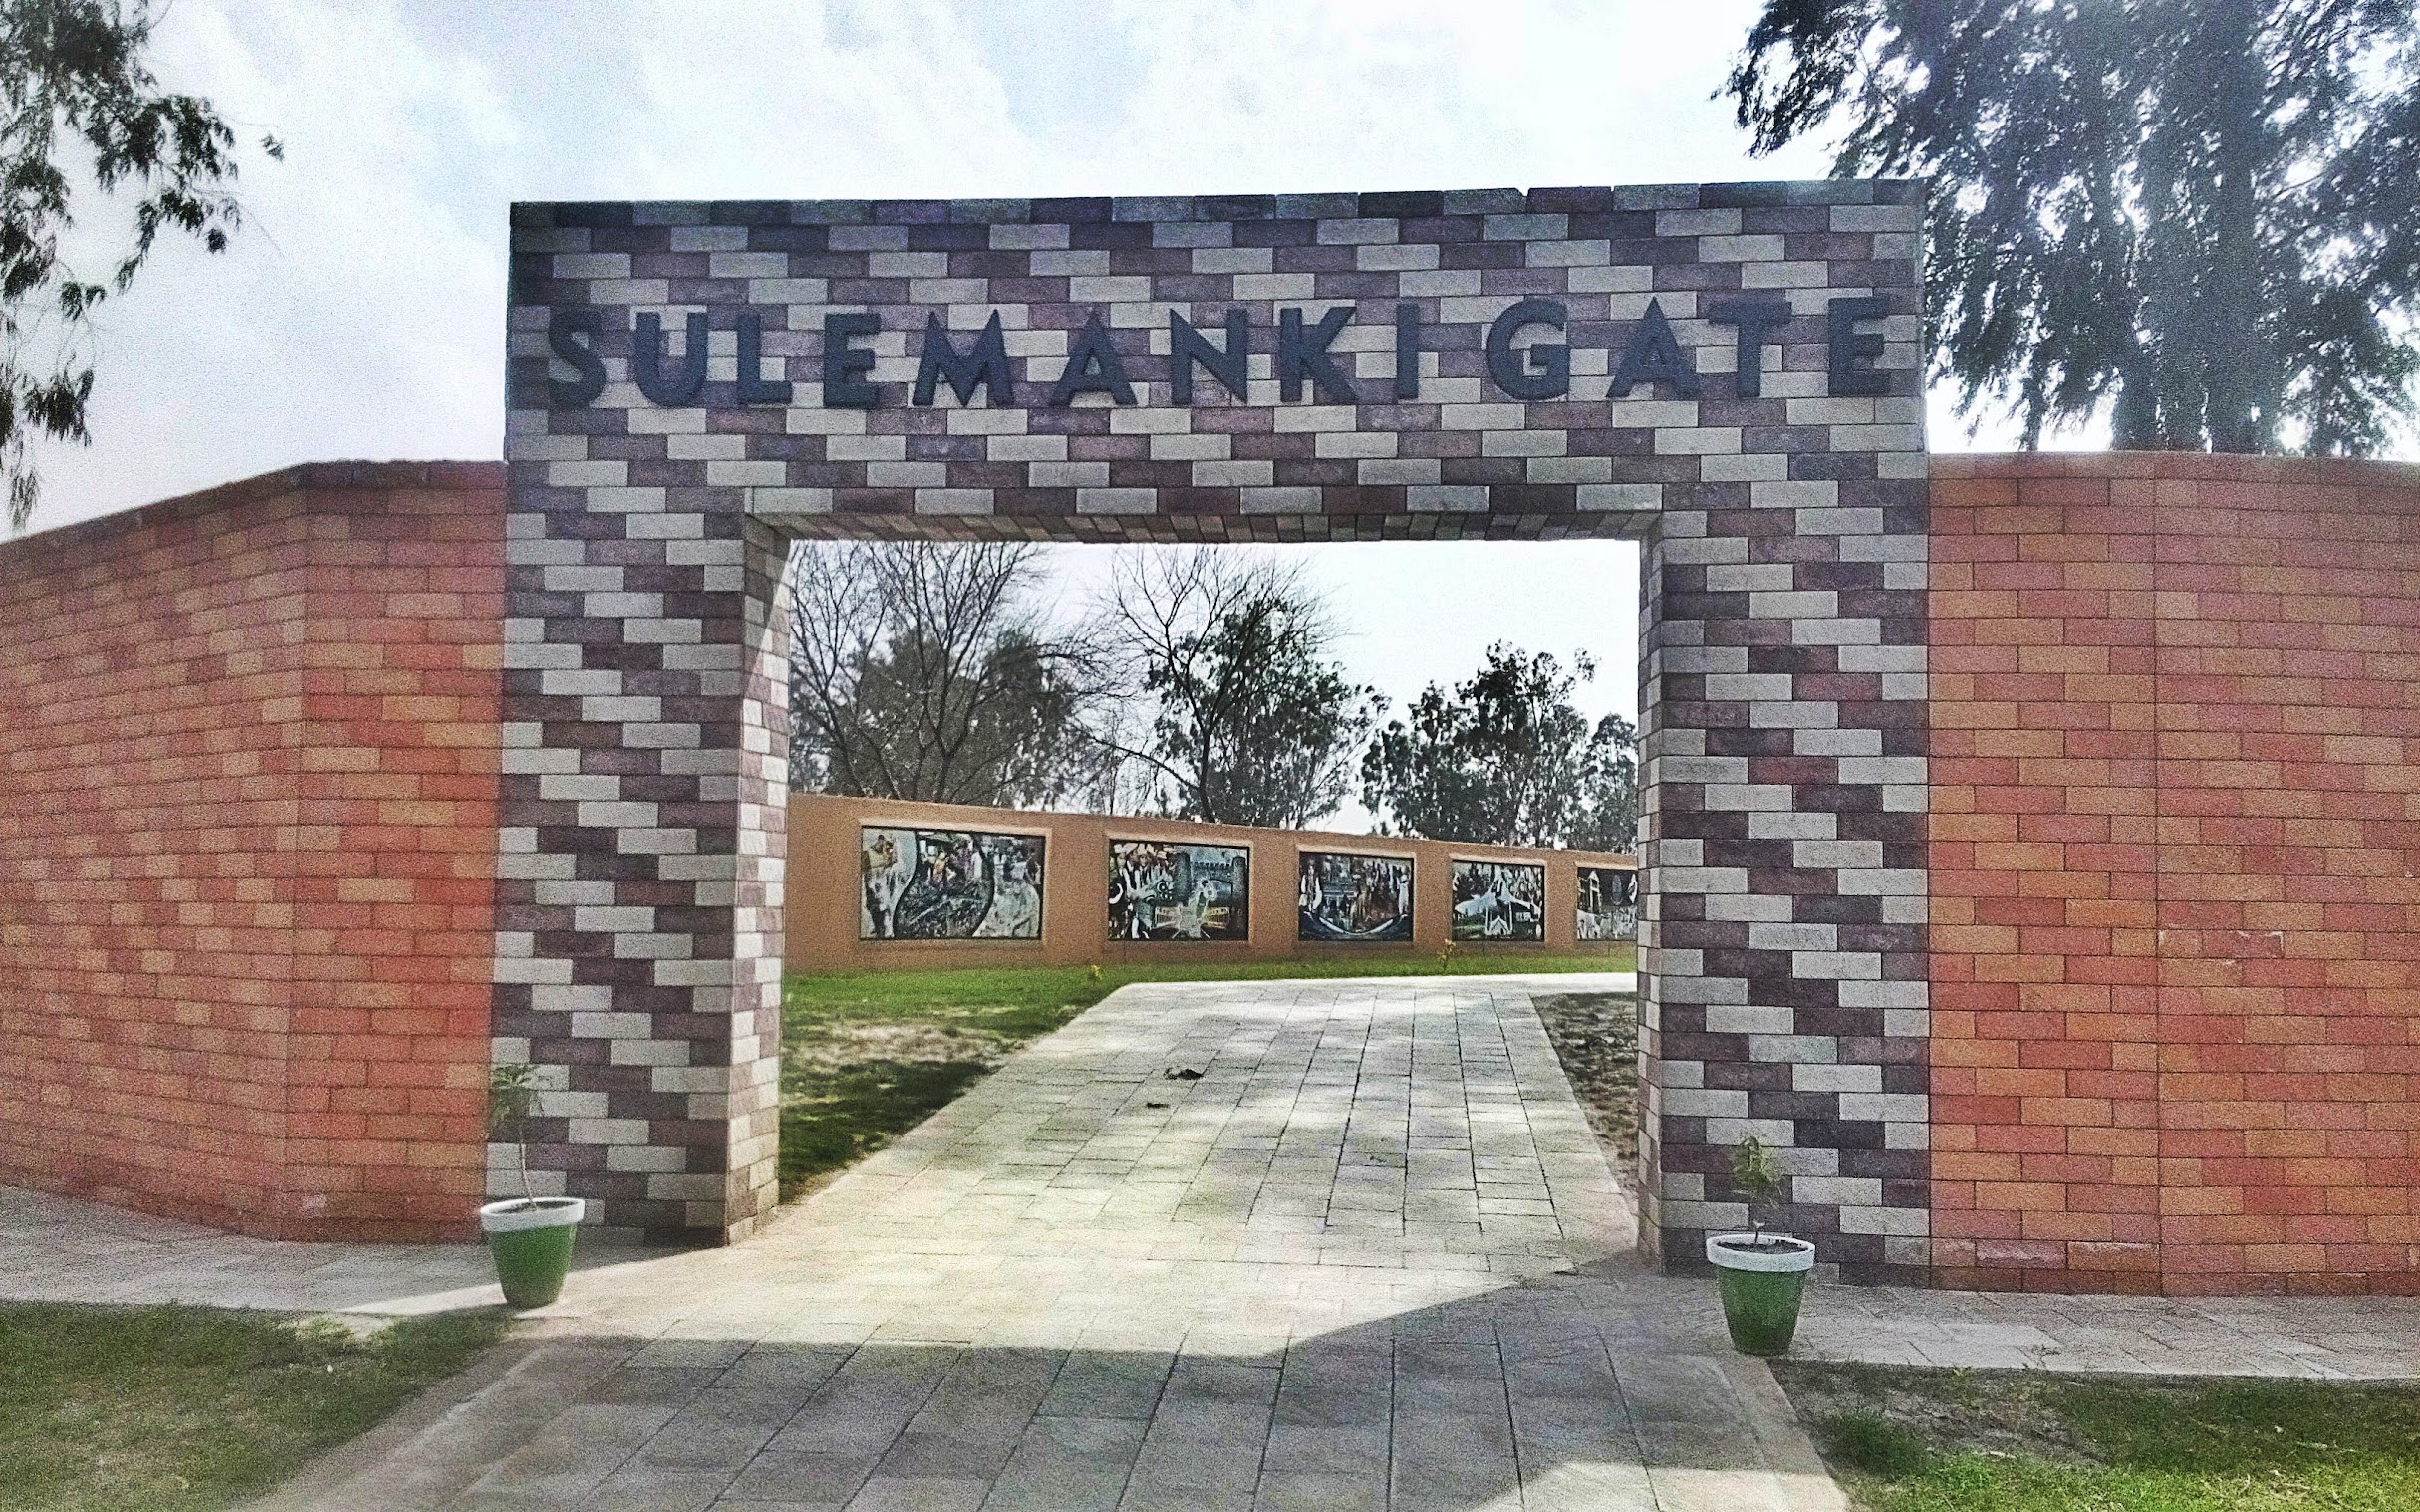 Entrance to Sulemanki Post